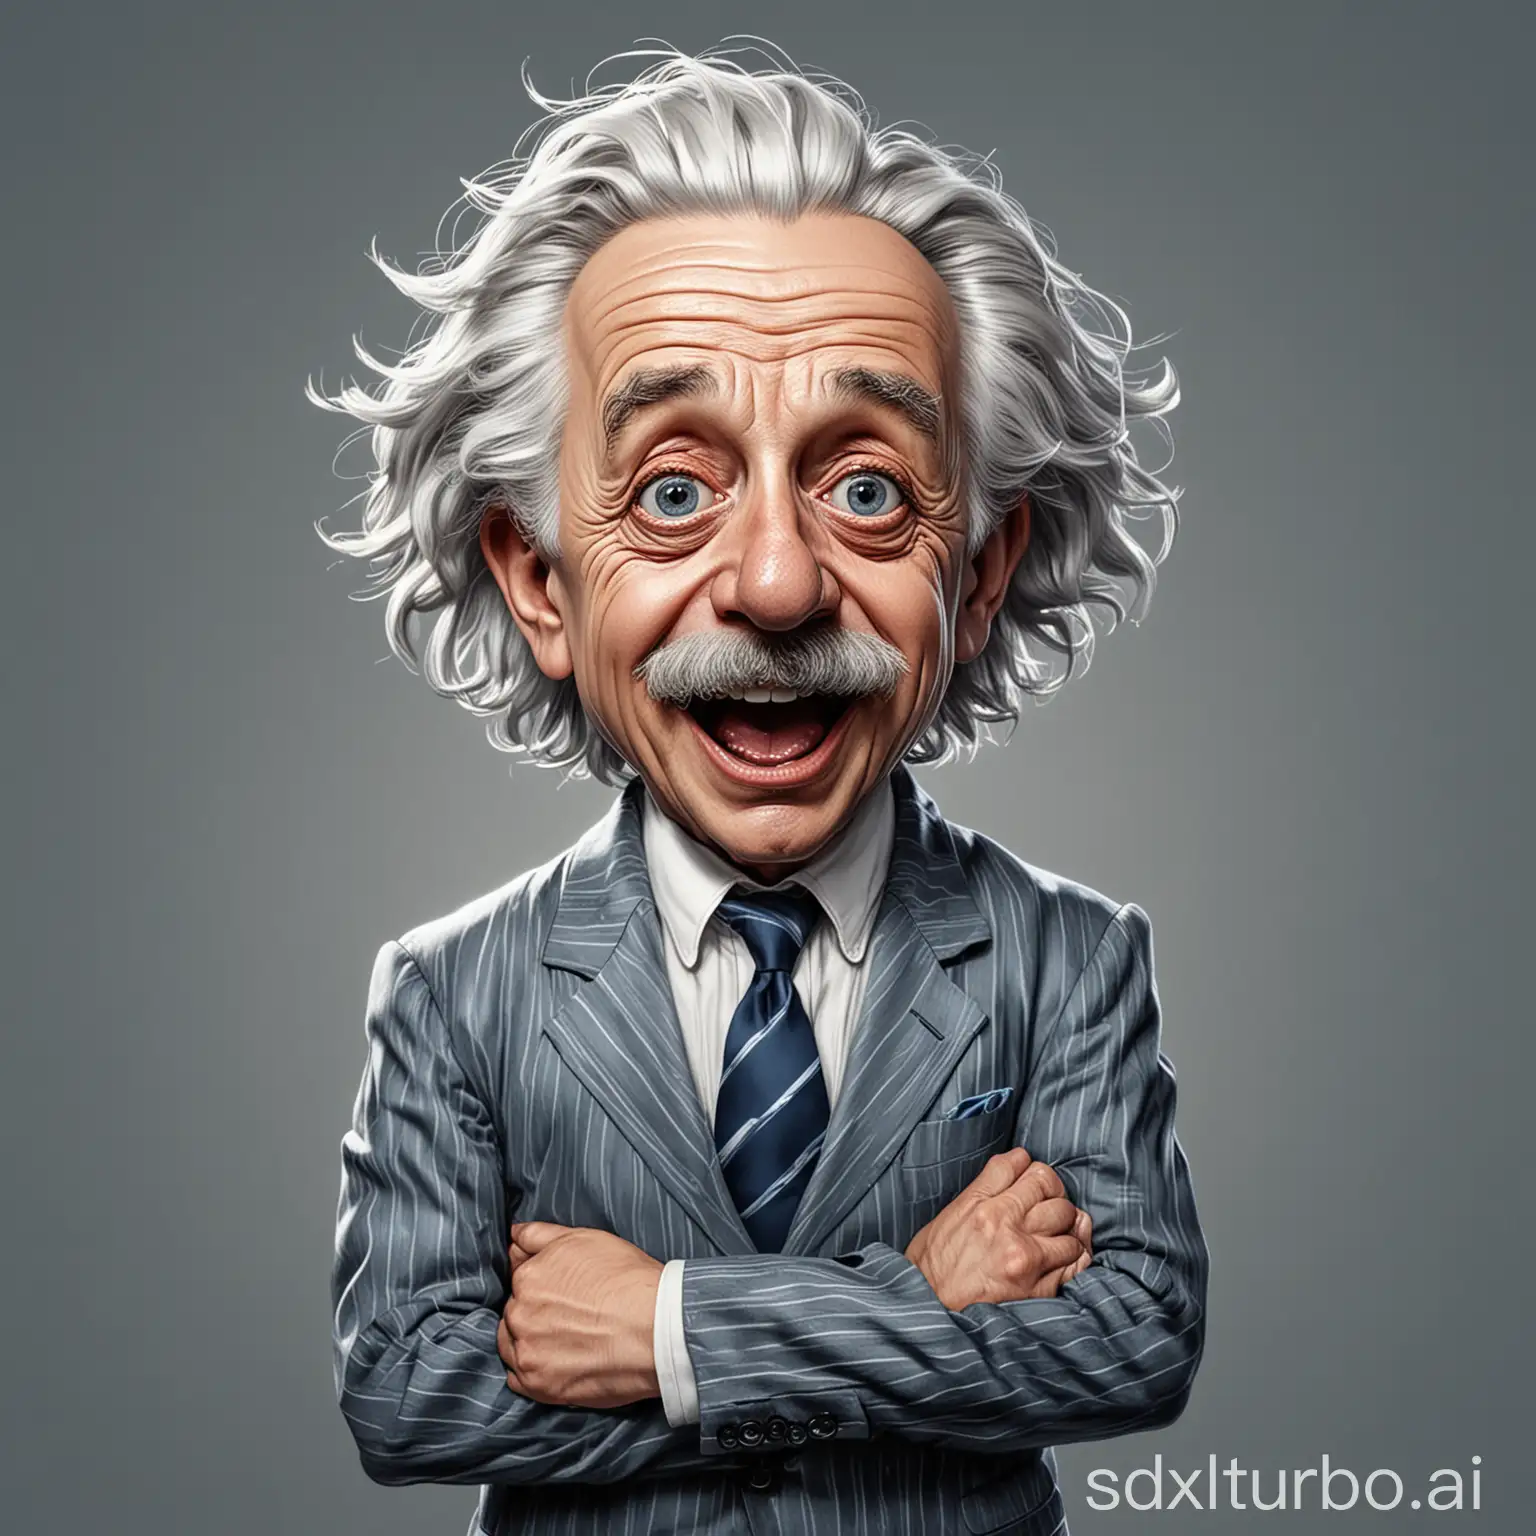 Cartoon caricature of Albert Einstein on a white background in a vector art style suitable for a t-shirt design. He is wearing a suit and tie with blue stripes on the sleeves, arms crossed across his chest. he's screaming, his mouth open. He has white hair in an elegant wave style with gray streaks and a clean shaven face. His eyes are bright with wide open pupils and his facial features are exaggerated. It is a full body shot at a high resolution, in the style of caricatures.